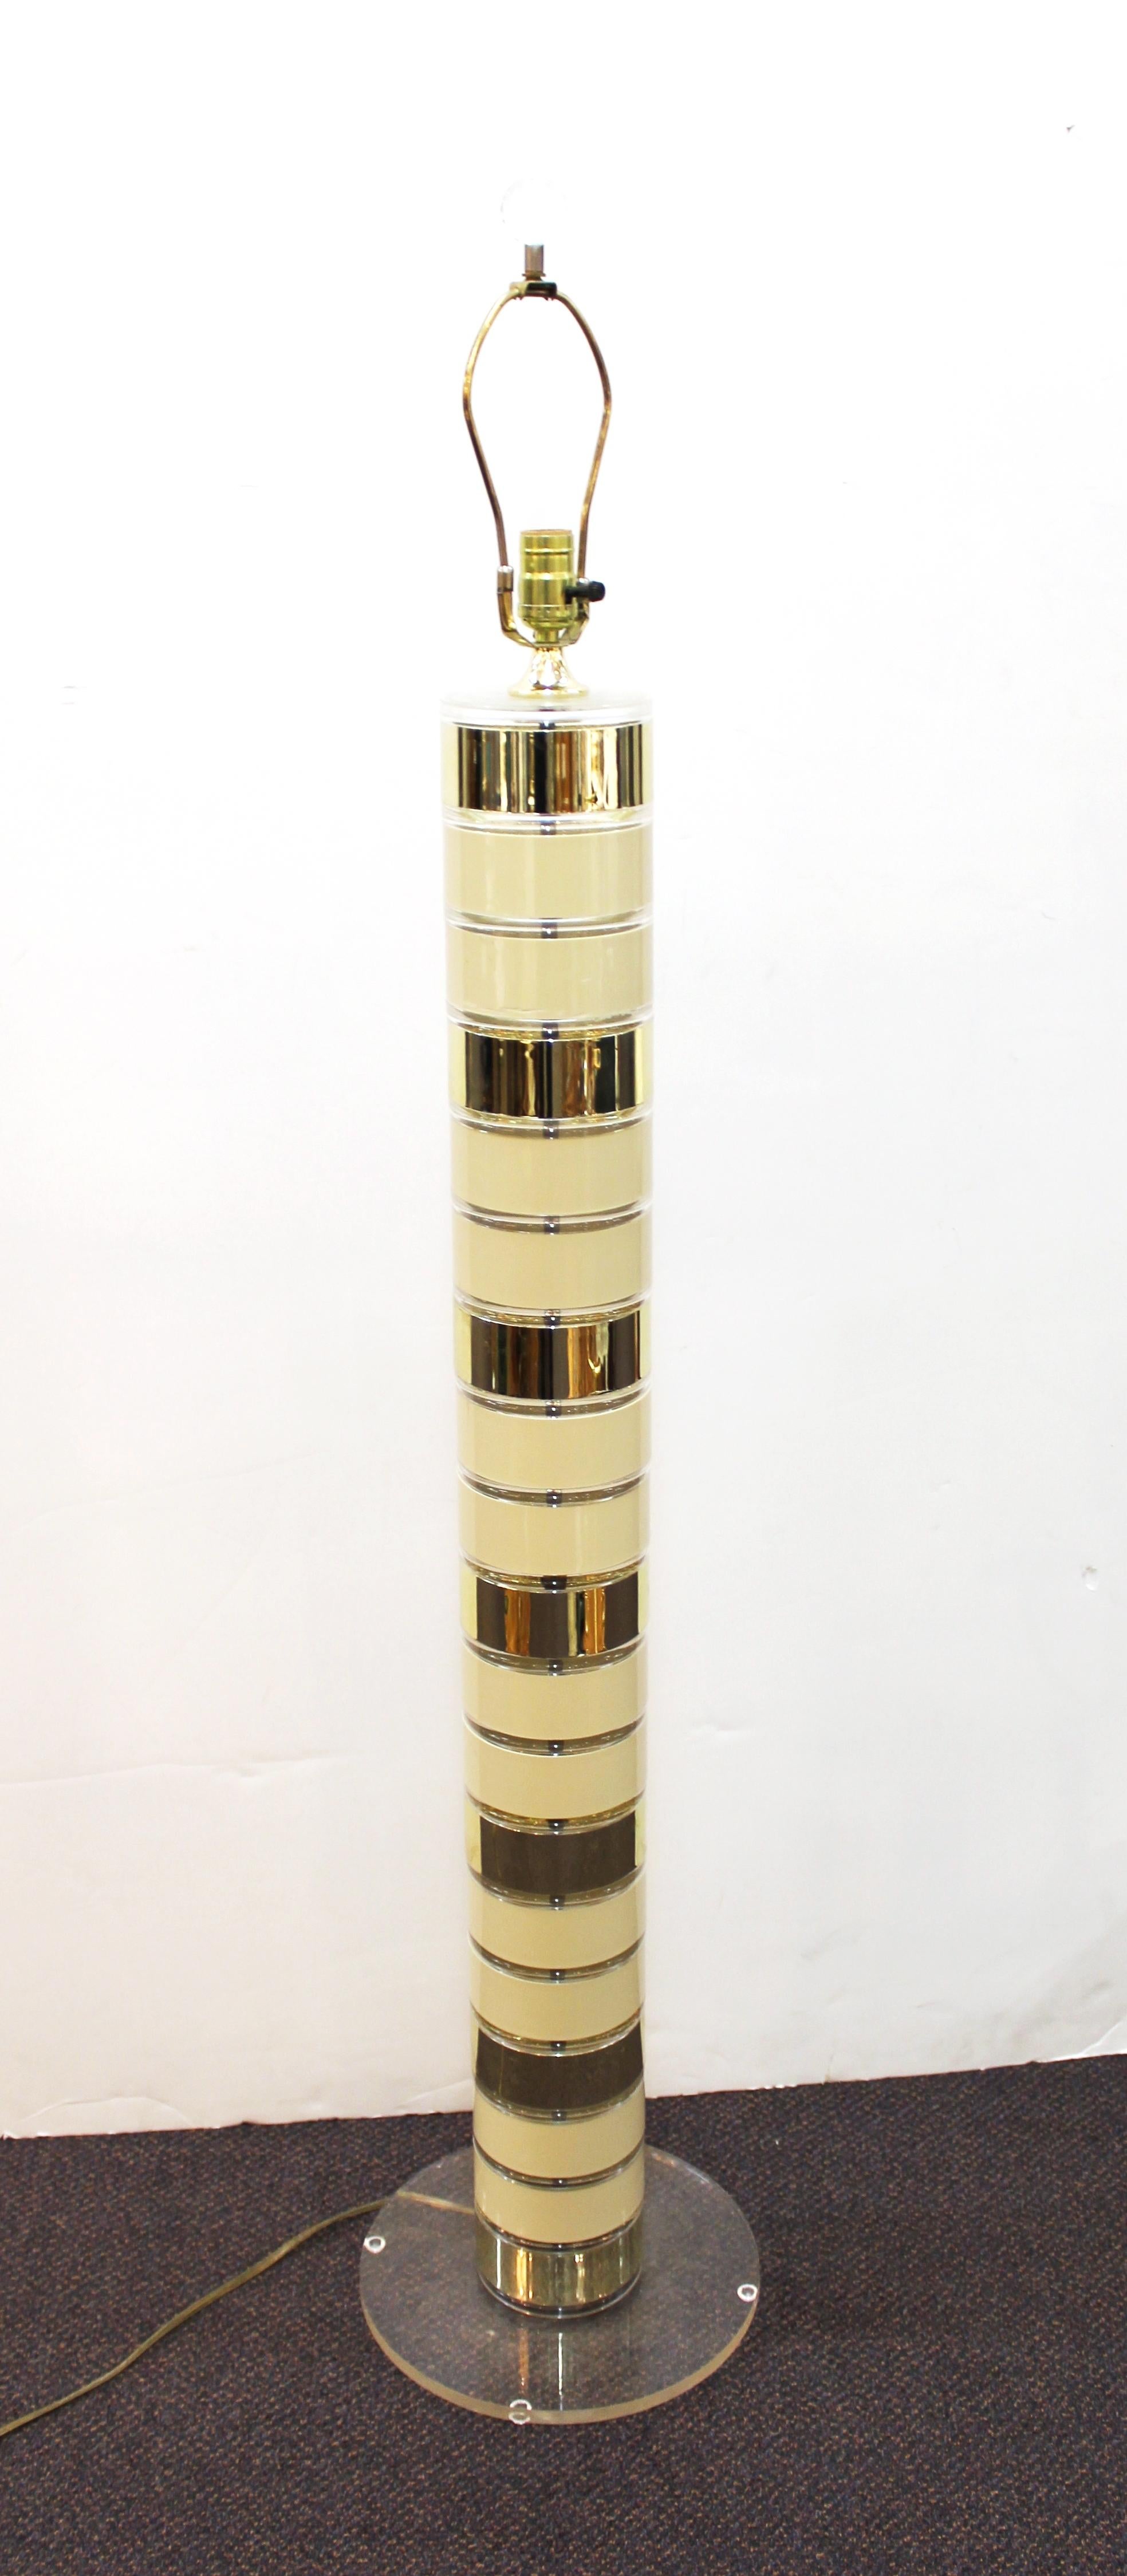 Post-modern floor lamp in stacked Lucite elements with a Lucite ball finial, made by Optique in the United states during the 1980s. The piece has a label on the bottom with a patent mark dated from the 1980s and is in great vintage condition.